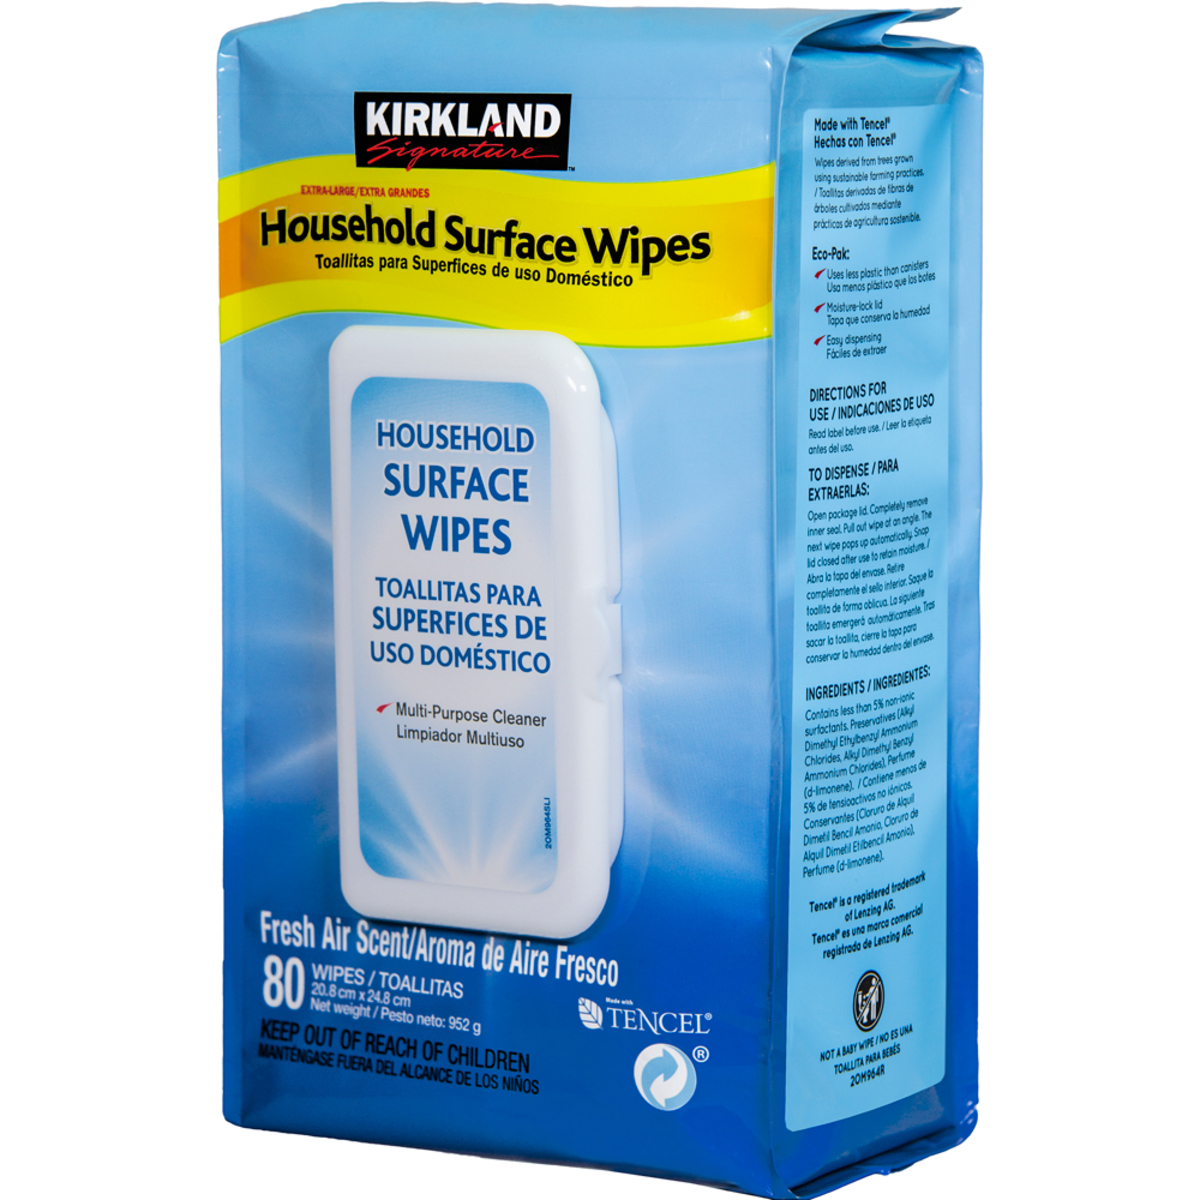 Kirkland Signature Household Surface Wipes 304 Pack by Kirkla 36871 fromJAPAN 